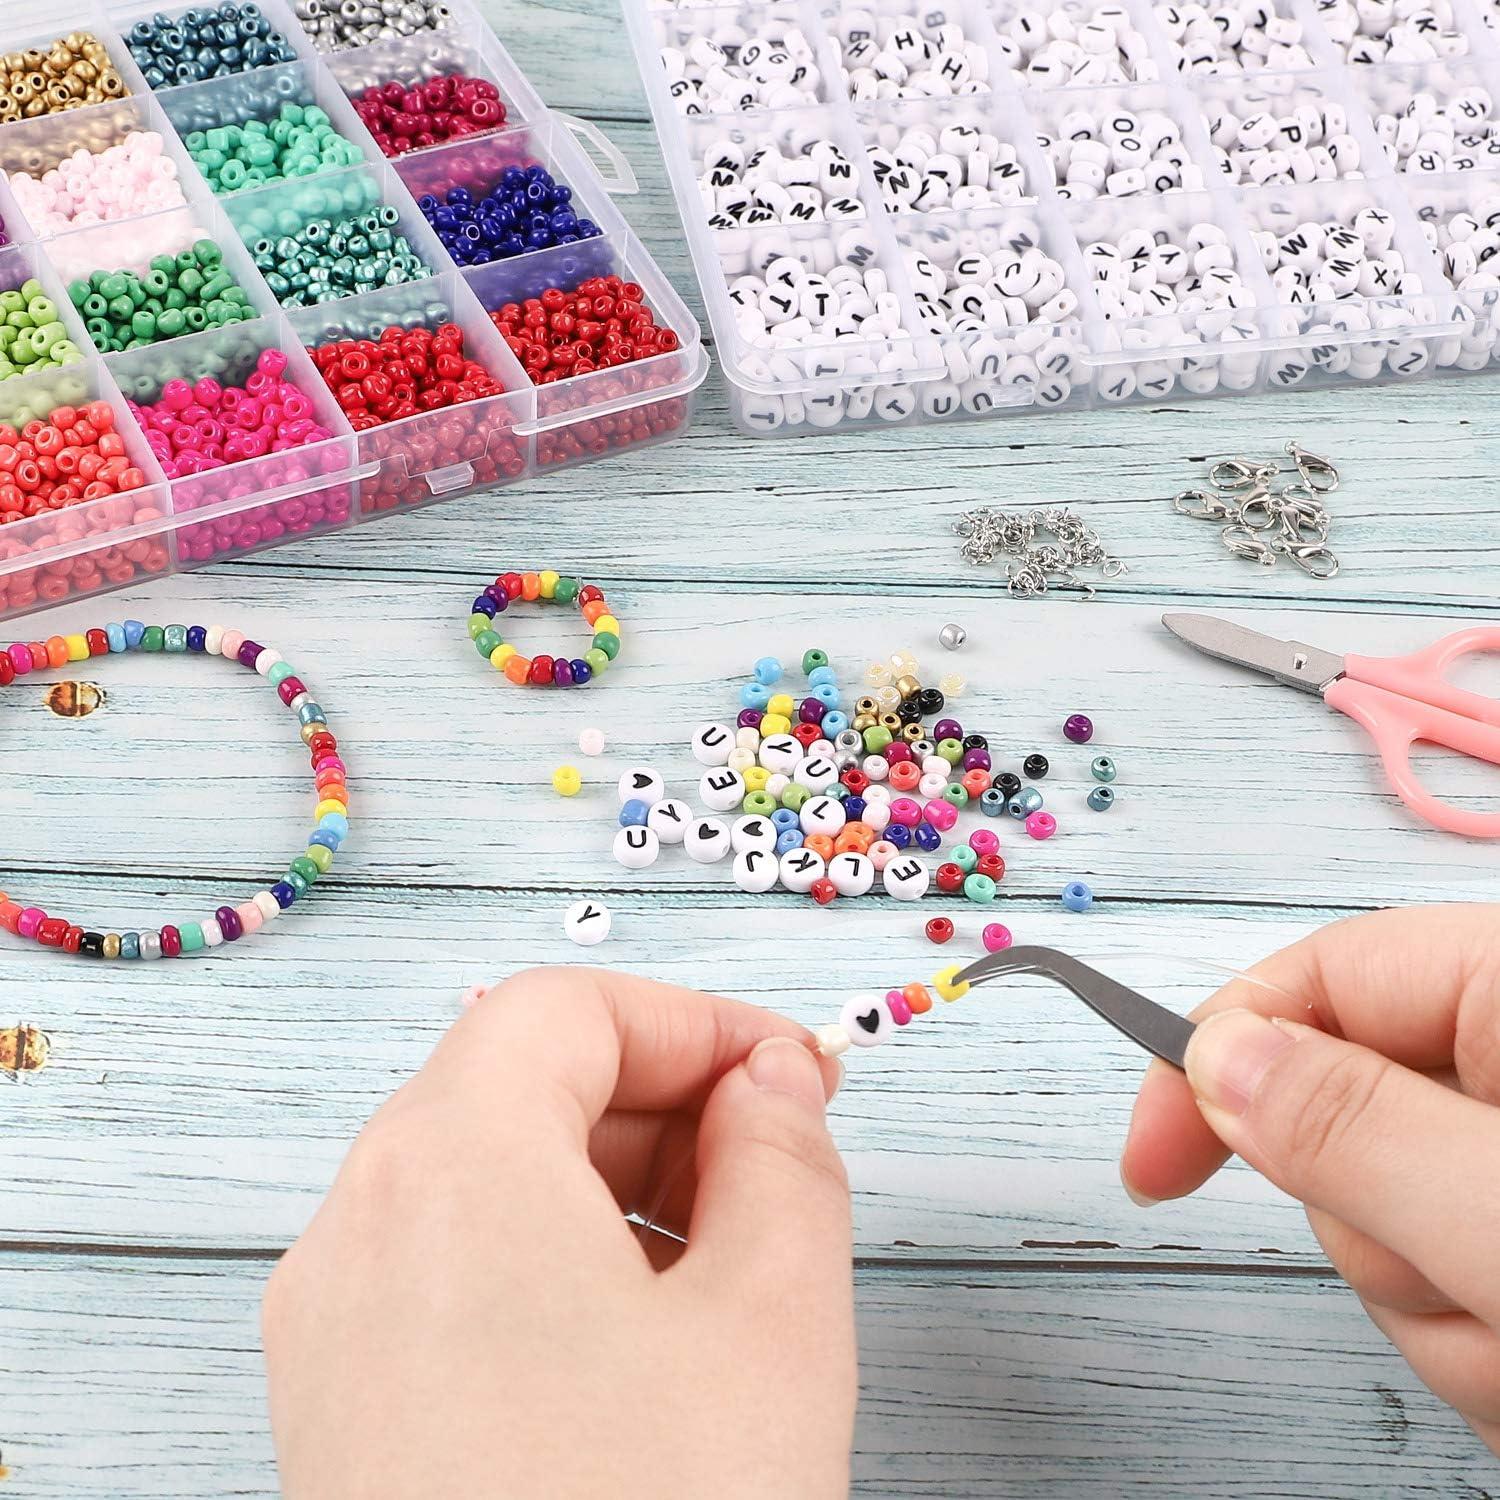 OUTUXED 7200pcs 4mm Glass Seed Beads for Bracelets Making Kit 300pcs  Alphabet Letter Beads for Jewelry Making and Crafts with Elastic String  Cords, Tweezers and Accessories DIY Material